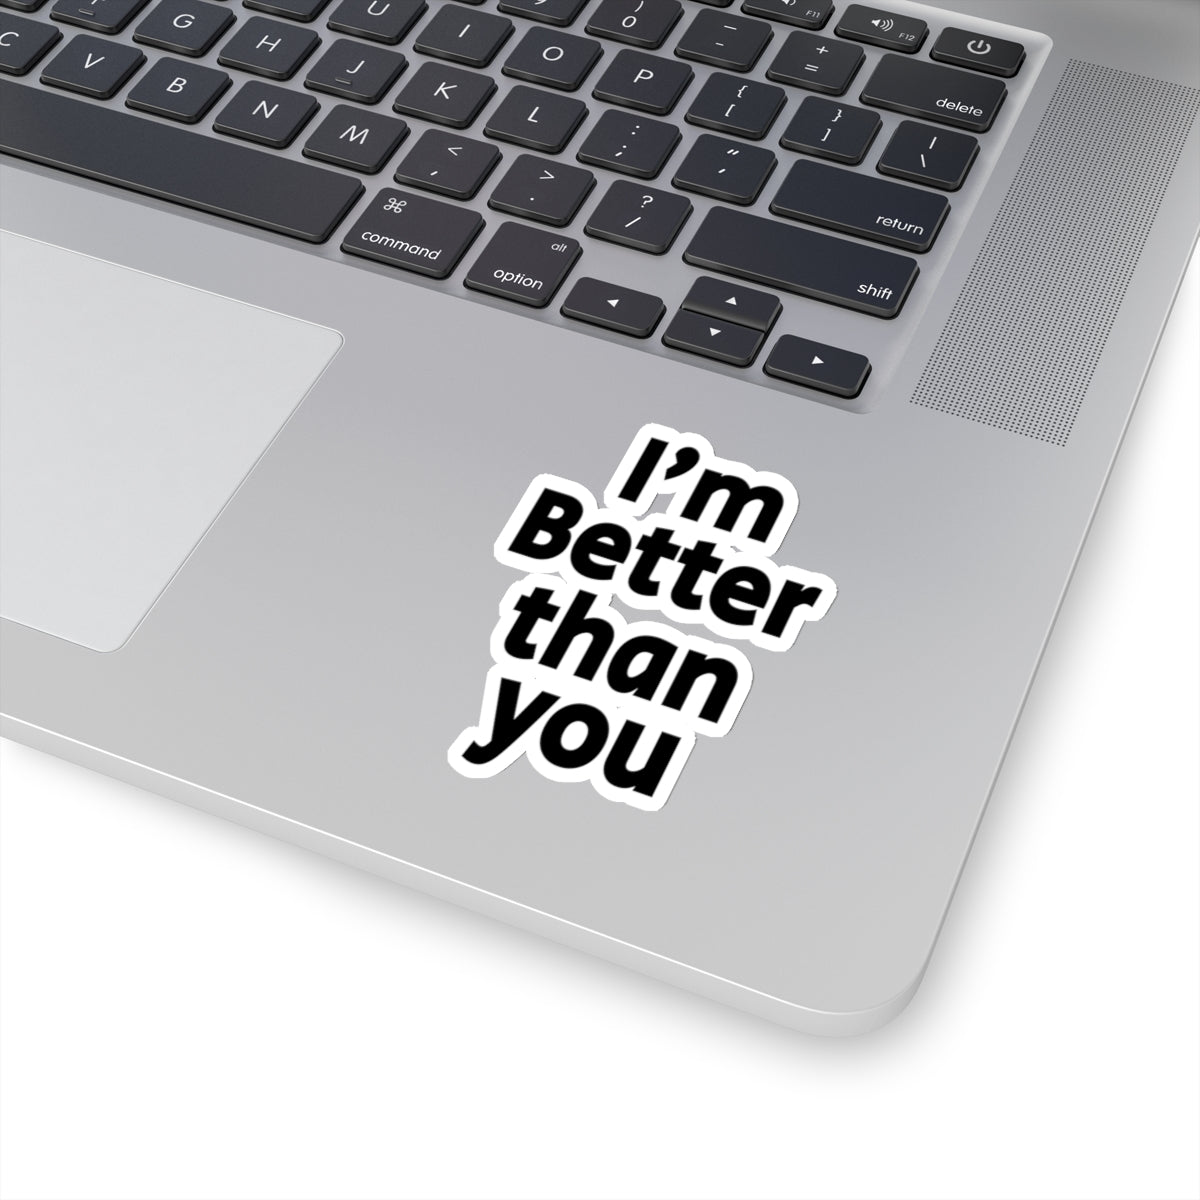 I'm Better Than You - Kiss-Cut Stickers